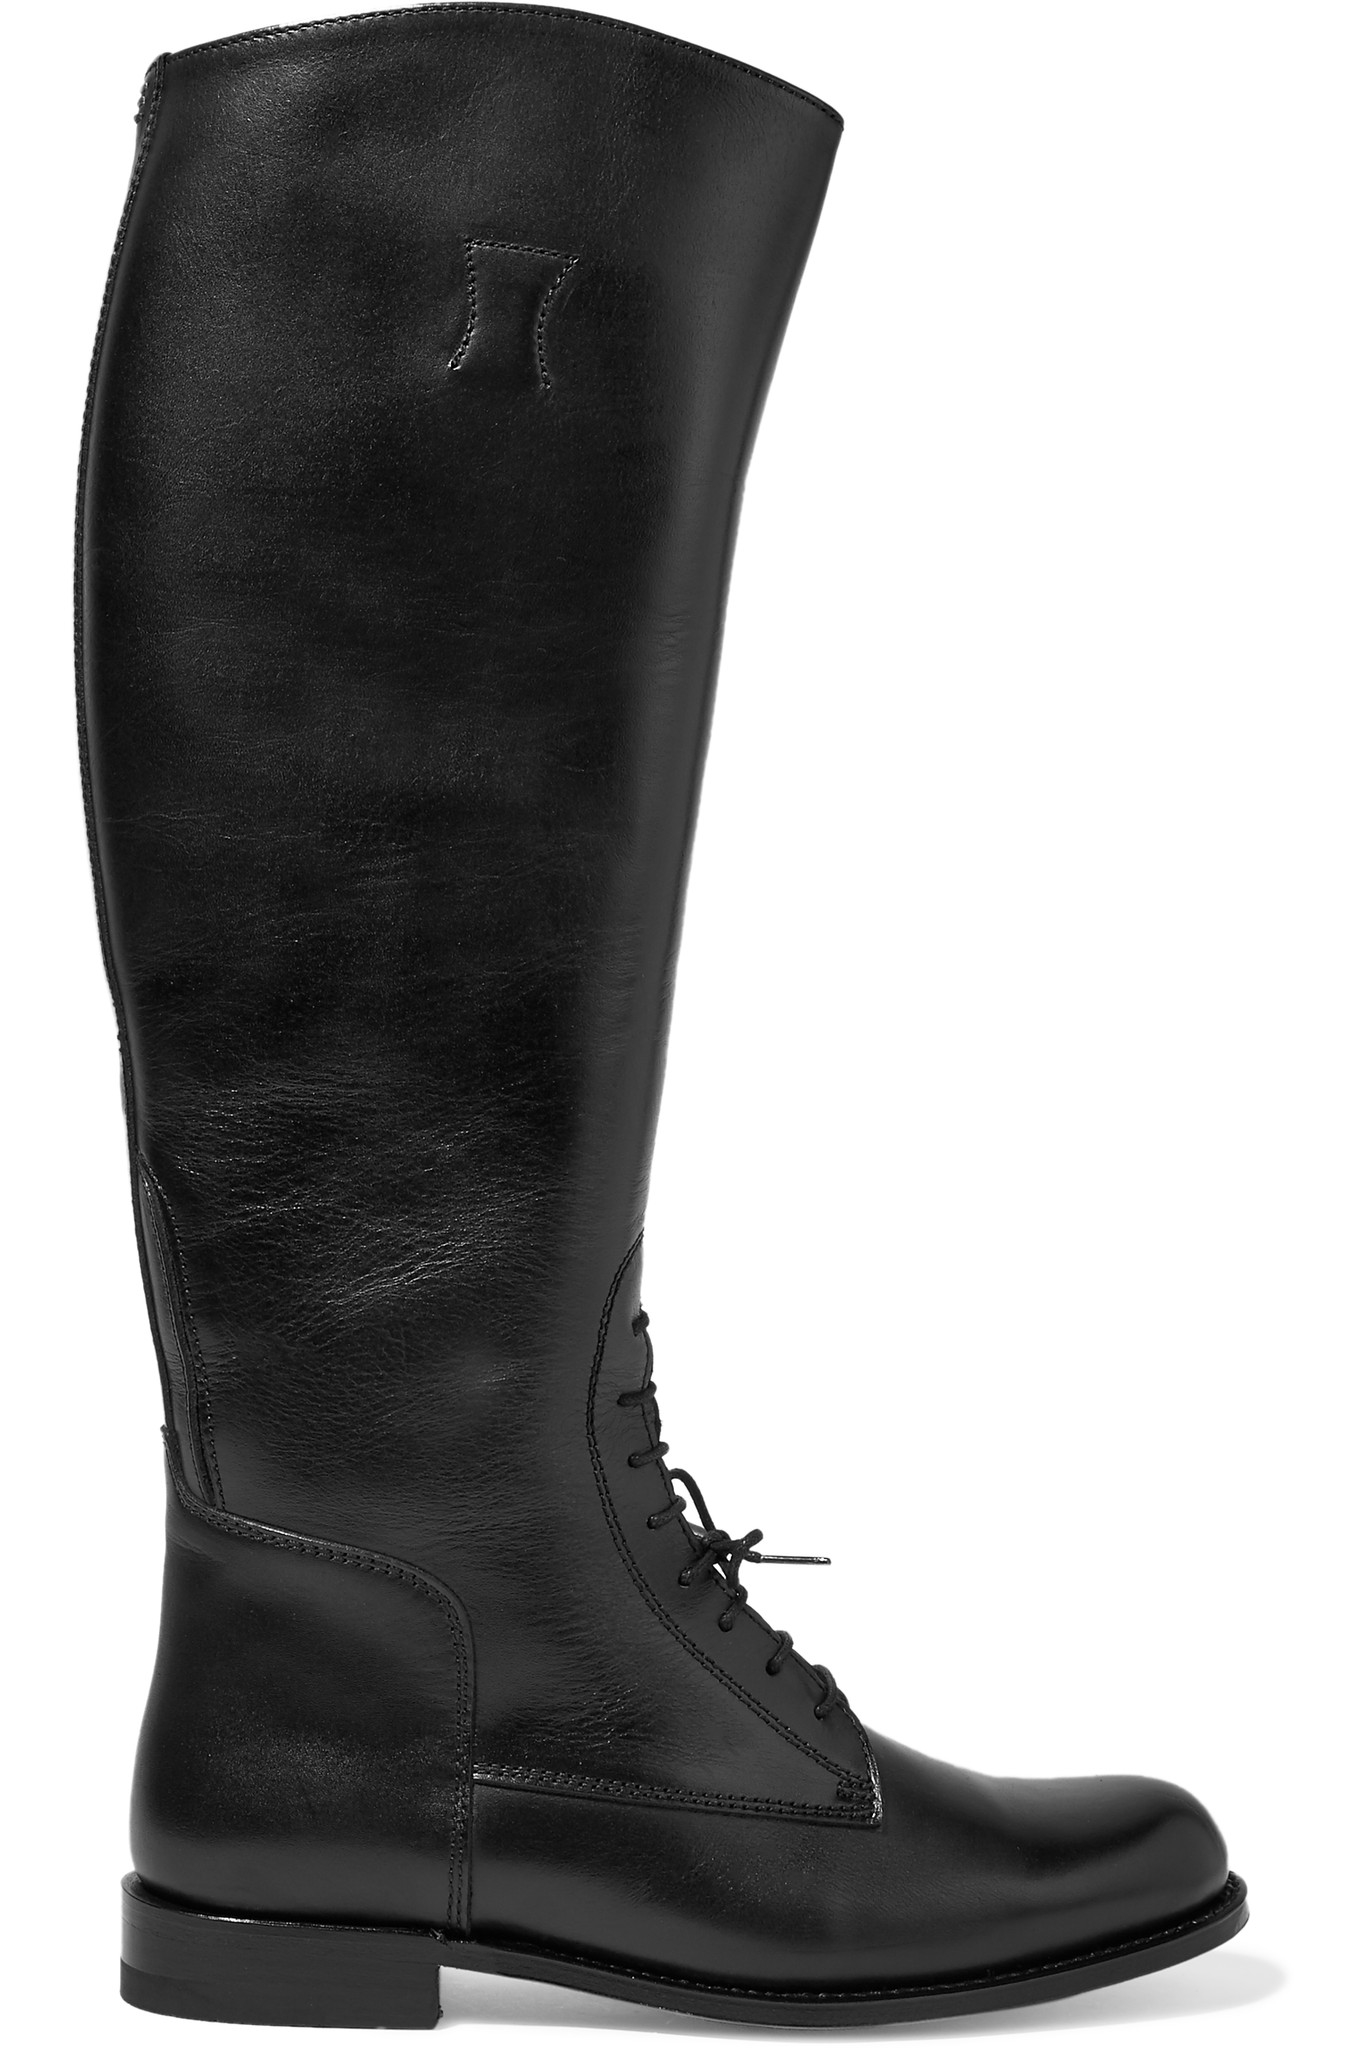 Lyst - Ariat Palencia Lace-up Leather Riding Boots in Black